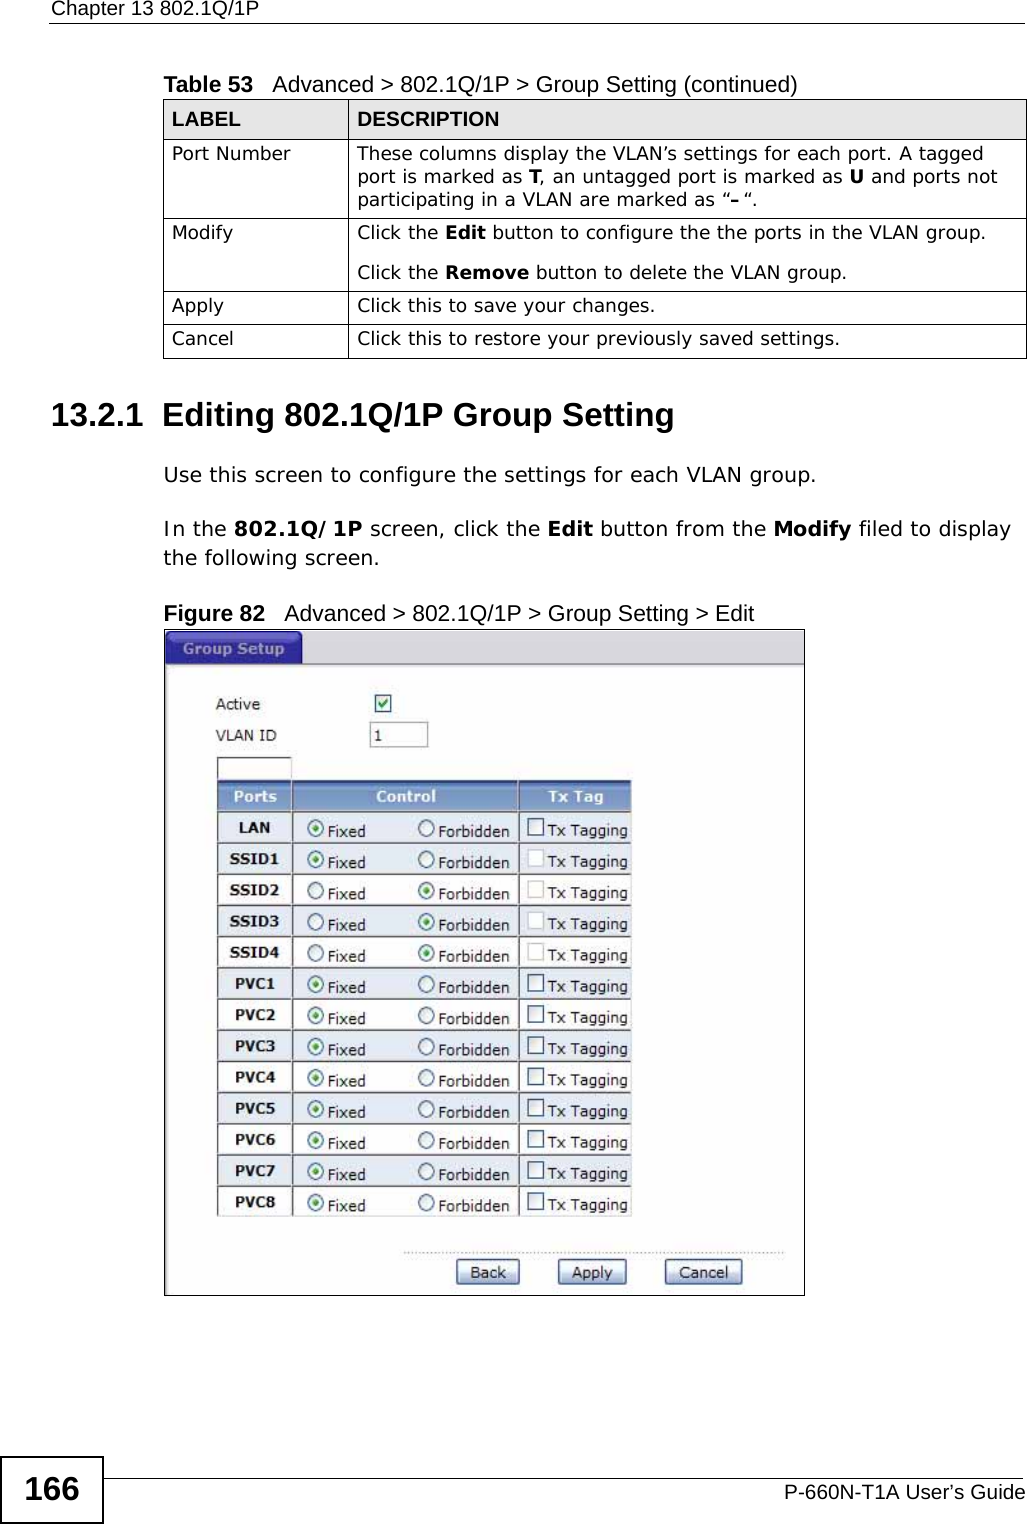 Chapter 13 802.1Q/1PP-660N-T1A User’s Guide16613.2.1  Editing 802.1Q/1P Group SettingUse this screen to configure the settings for each VLAN group.In the 802.1Q/1P screen, click the Edit button from the Modify filed to display the following screen.Figure 82   Advanced &gt; 802.1Q/1P &gt; Group Setting &gt; EditPort Number These columns display the VLAN’s settings for each port. A tagged port is marked as T, an untagged port is marked as U and ports not participating in a VLAN are marked as “–“. Modify Click the Edit button to configure the the ports in the VLAN group.Click the Remove button to delete the VLAN group.Apply Click this to save your changes.Cancel Click this to restore your previously saved settings.Table 53   Advanced &gt; 802.1Q/1P &gt; Group Setting (continued)LABEL DESCRIPTION